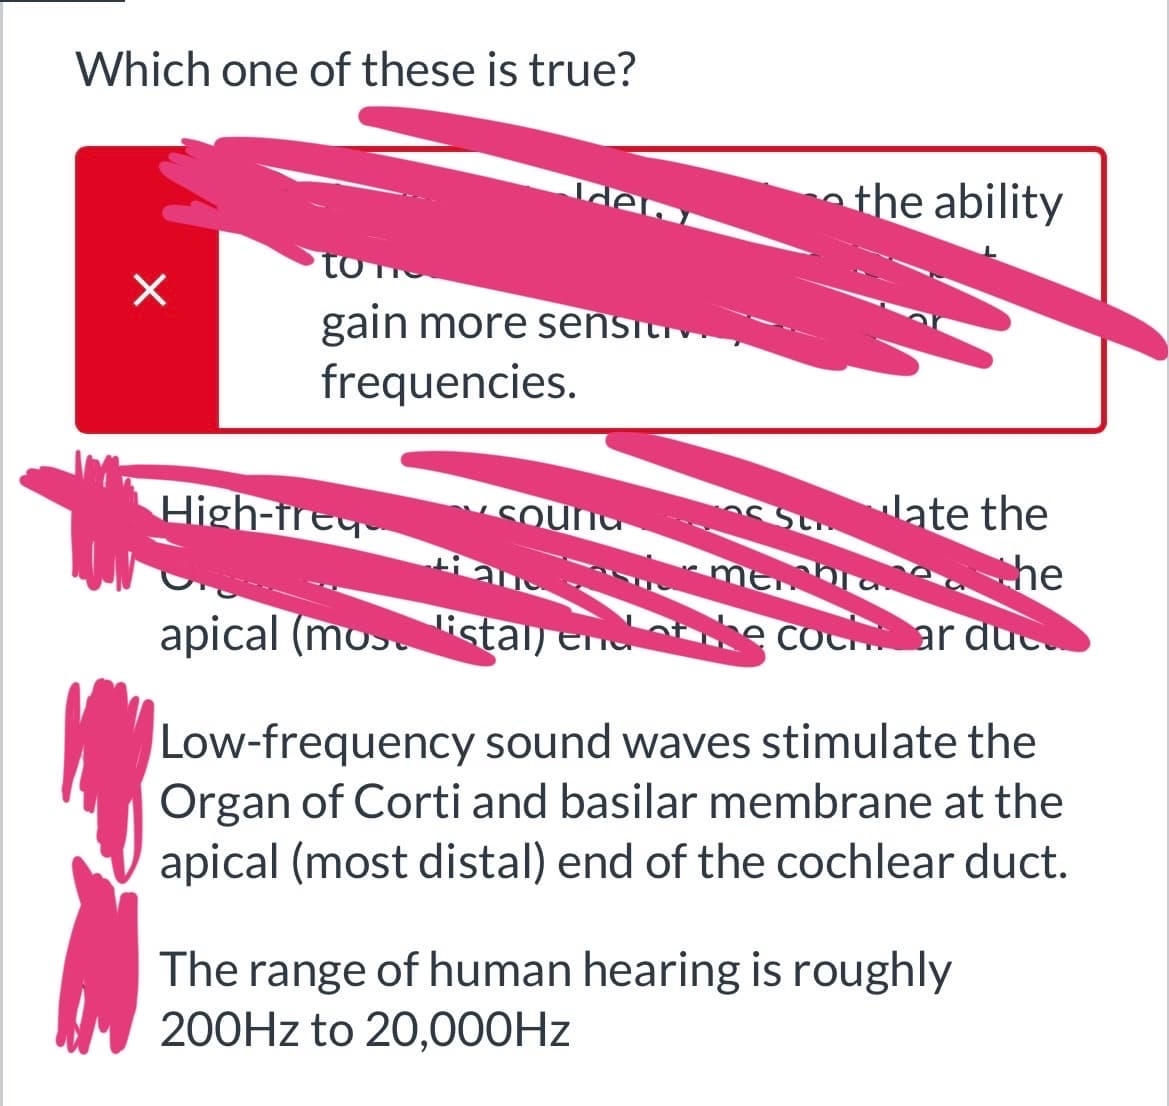 Which one of these is true?
X
to
gain more sensit
frequencies.
High-freq
den
Soun
iam
apical (mos ista
listal) en
Su
the ability
late the
he
ты
the cocar duc
Low-frequency sound waves stimulate the
Organ of Corti and basilar membrane at the
apical (most distal) end of the cochlear duct.
The range of human hearing is roughly
200Hz to 20,000Hz